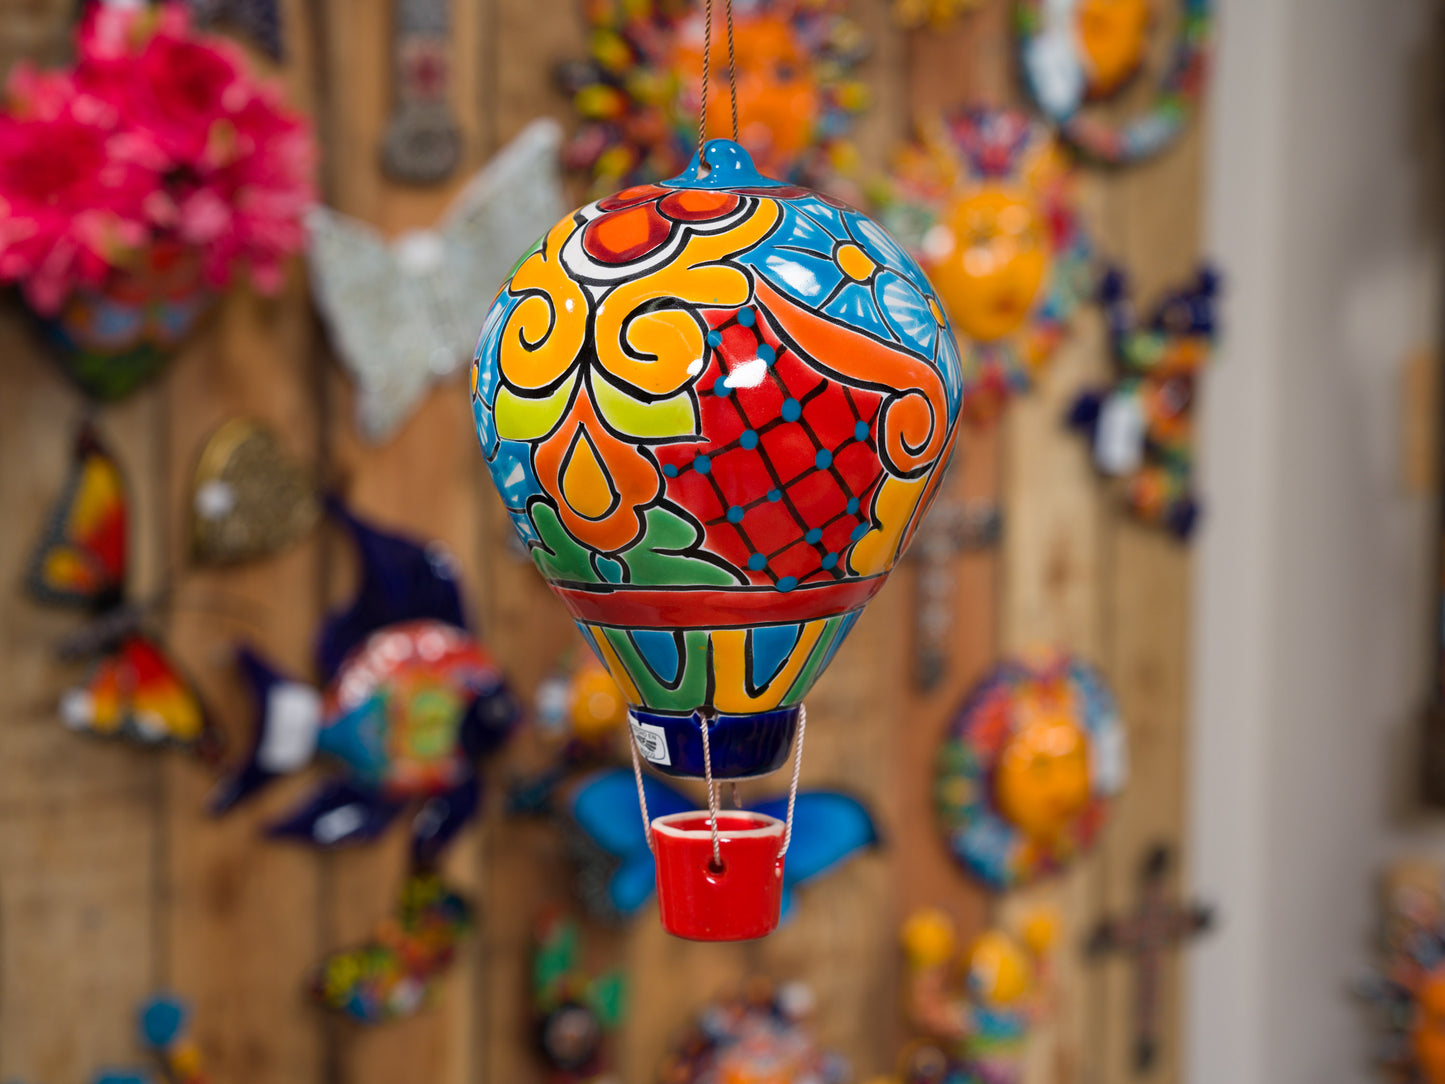 Hanging Hot Air Balloon - Small Red